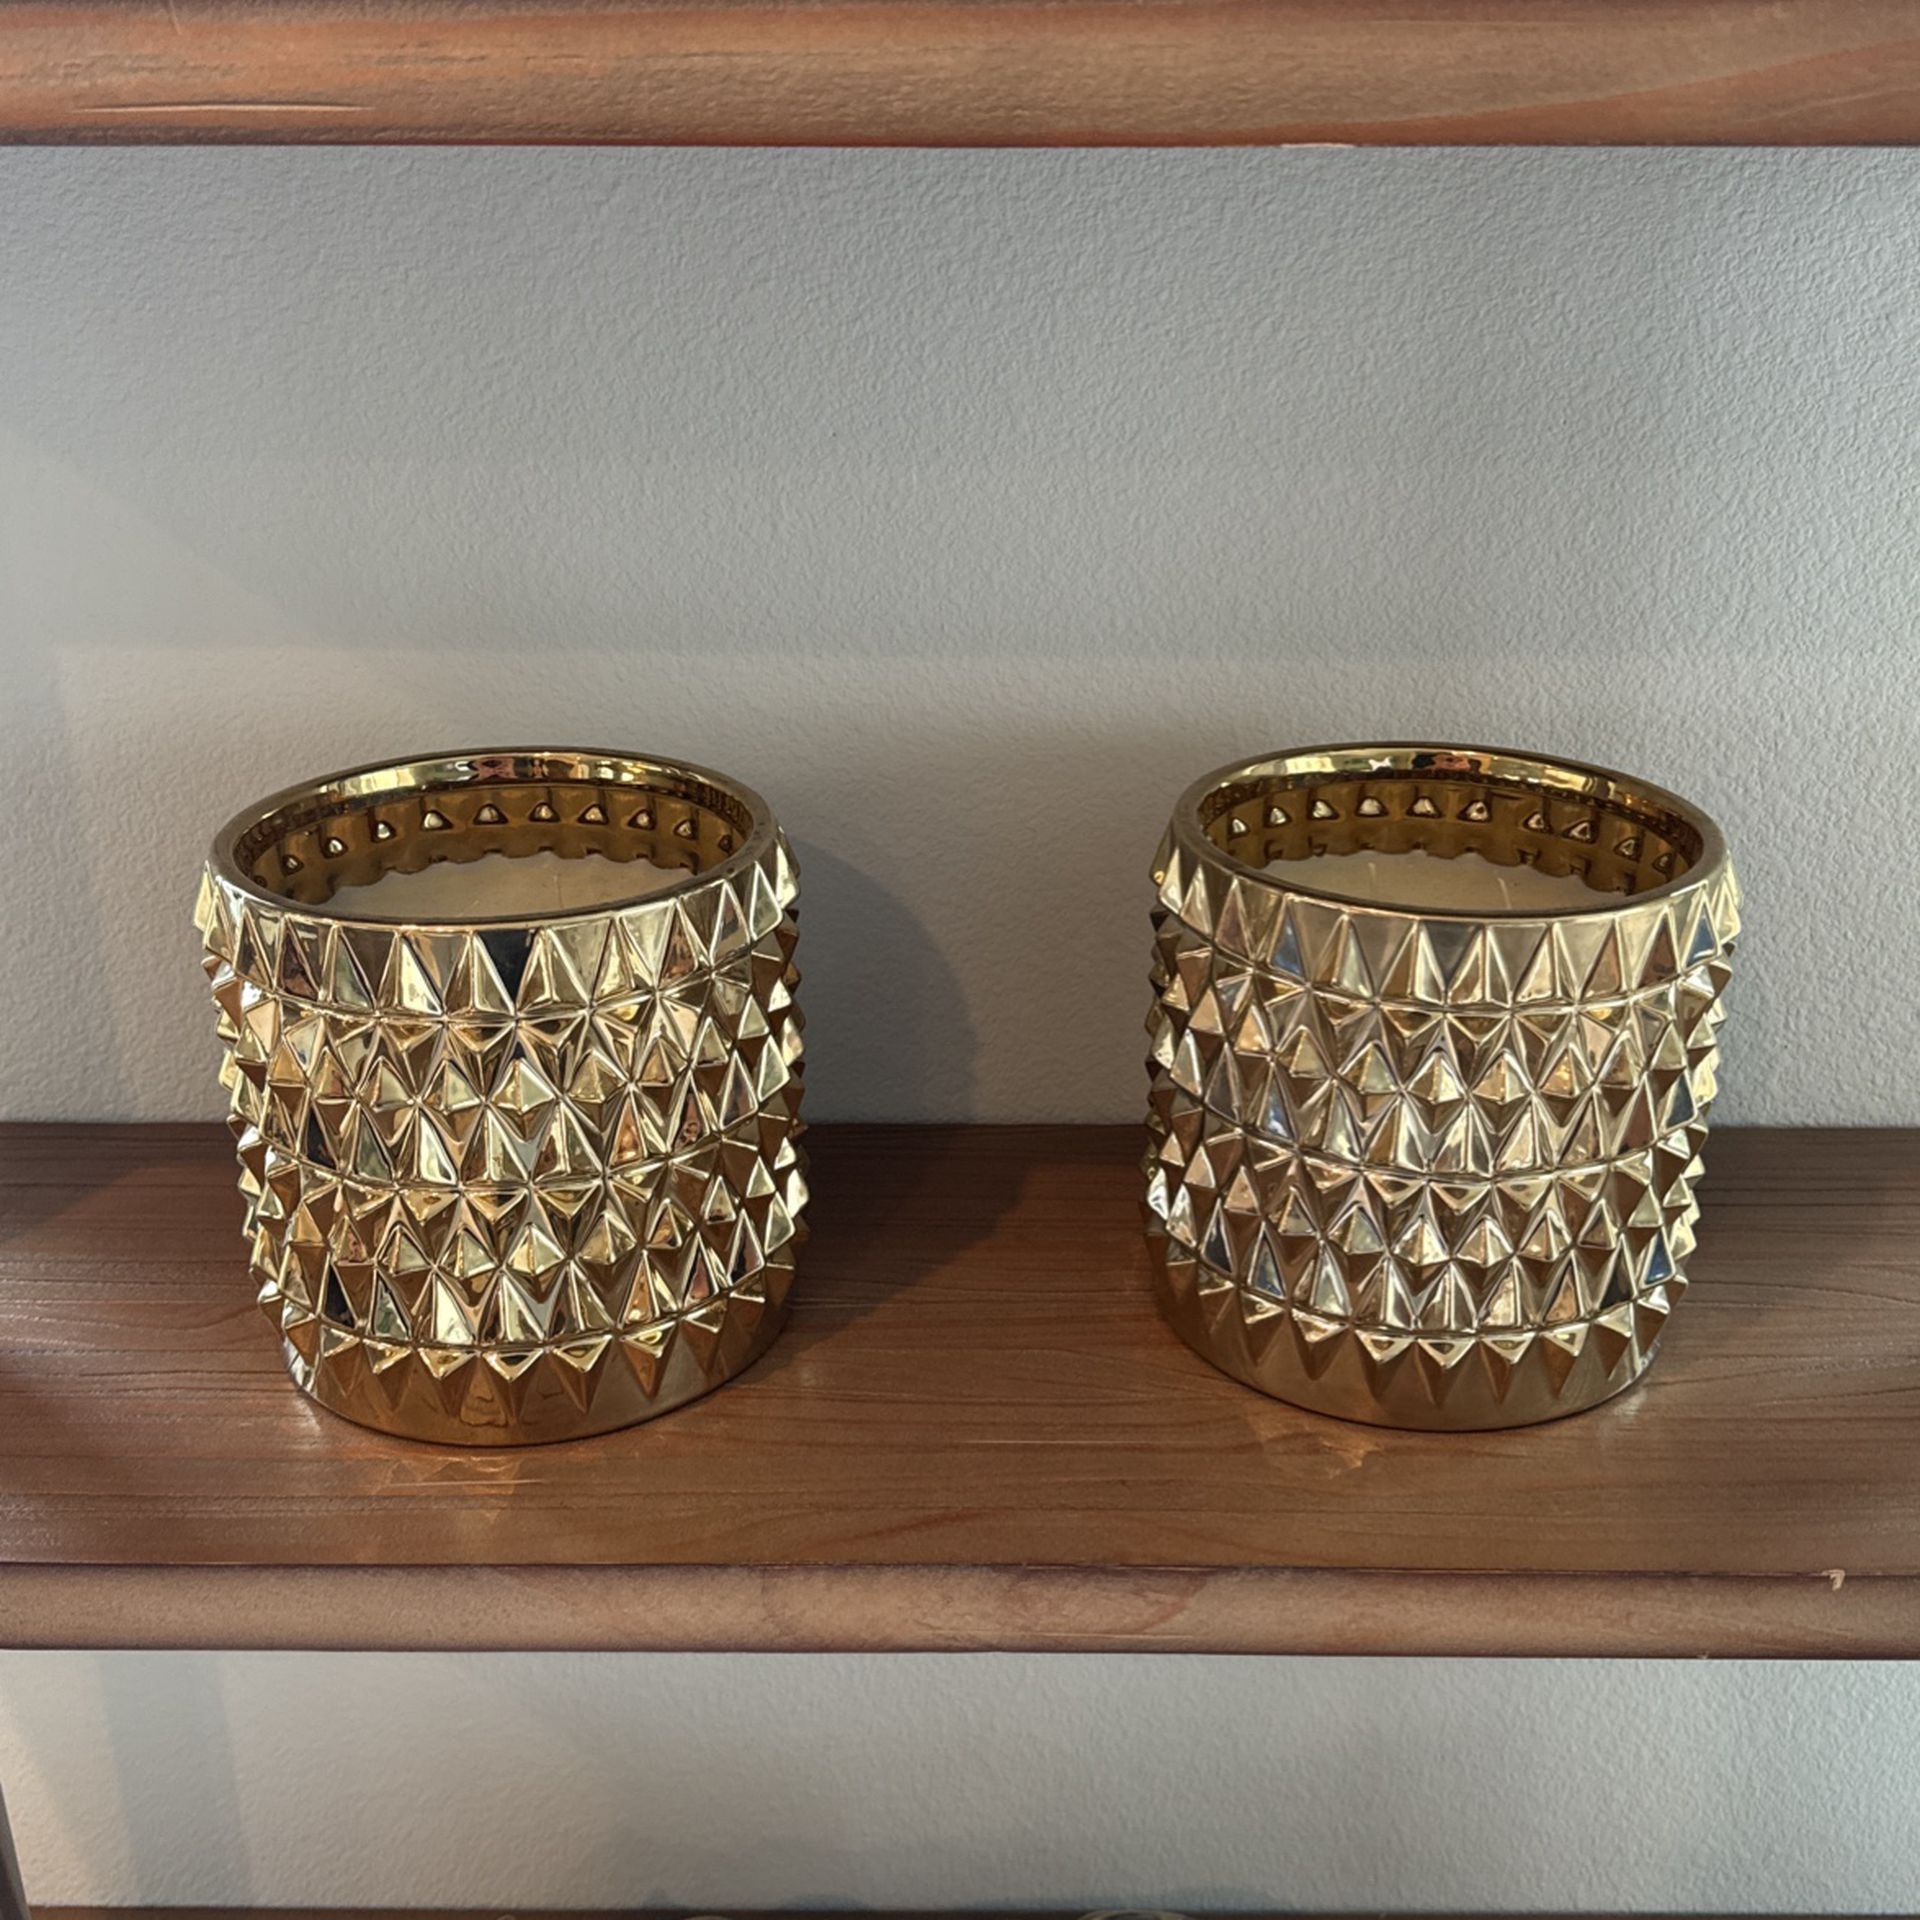 Two gold Candles